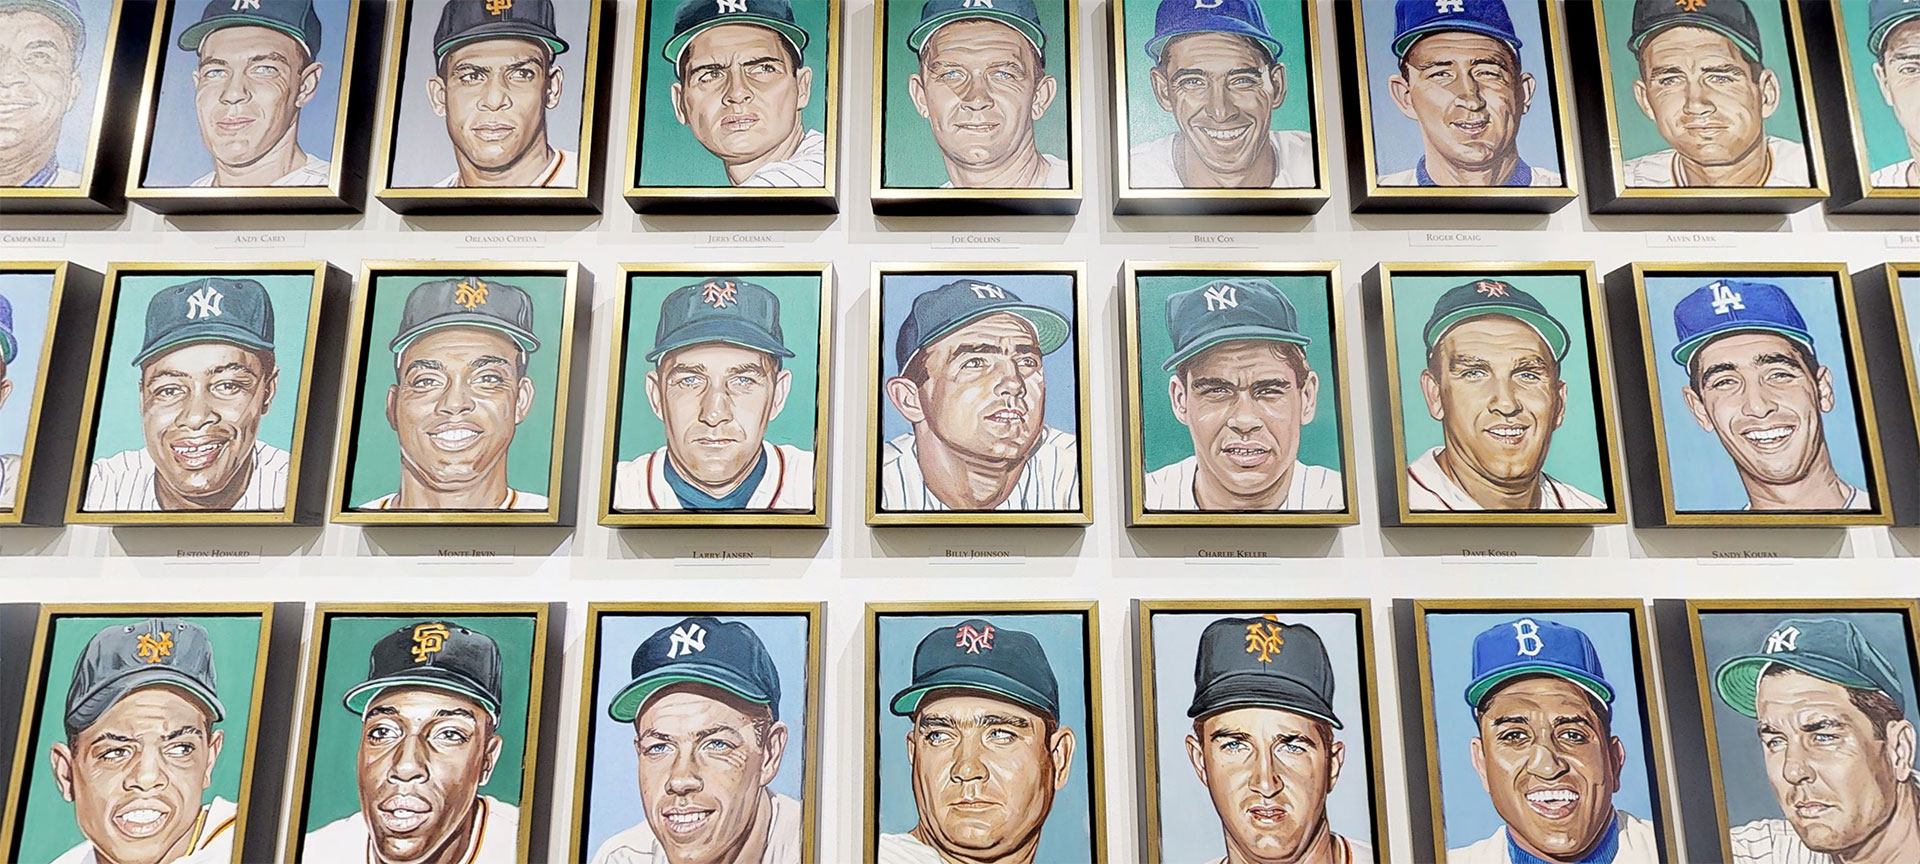 A close-up of portraits from the Golden Boys exhibition